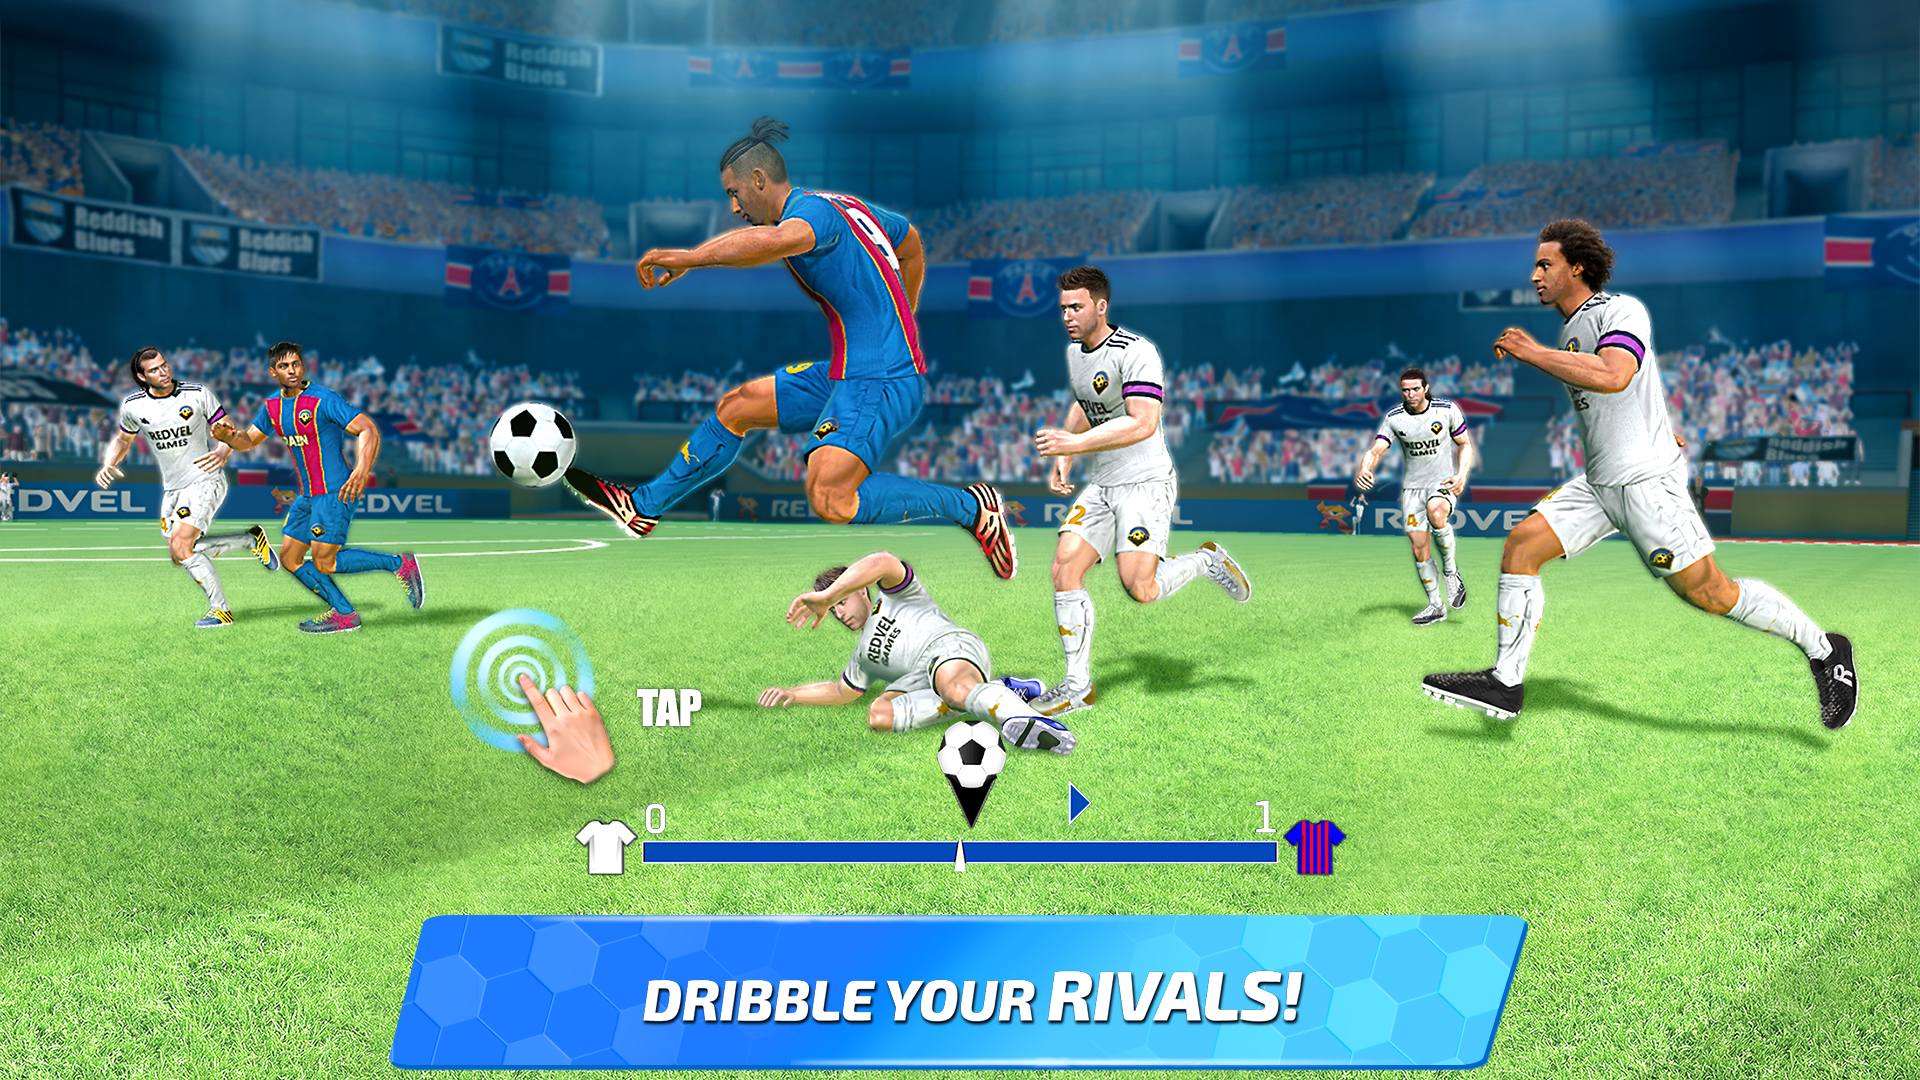 Download and play Soccer Star 22 Super Football on PC & Mac (Emulator)